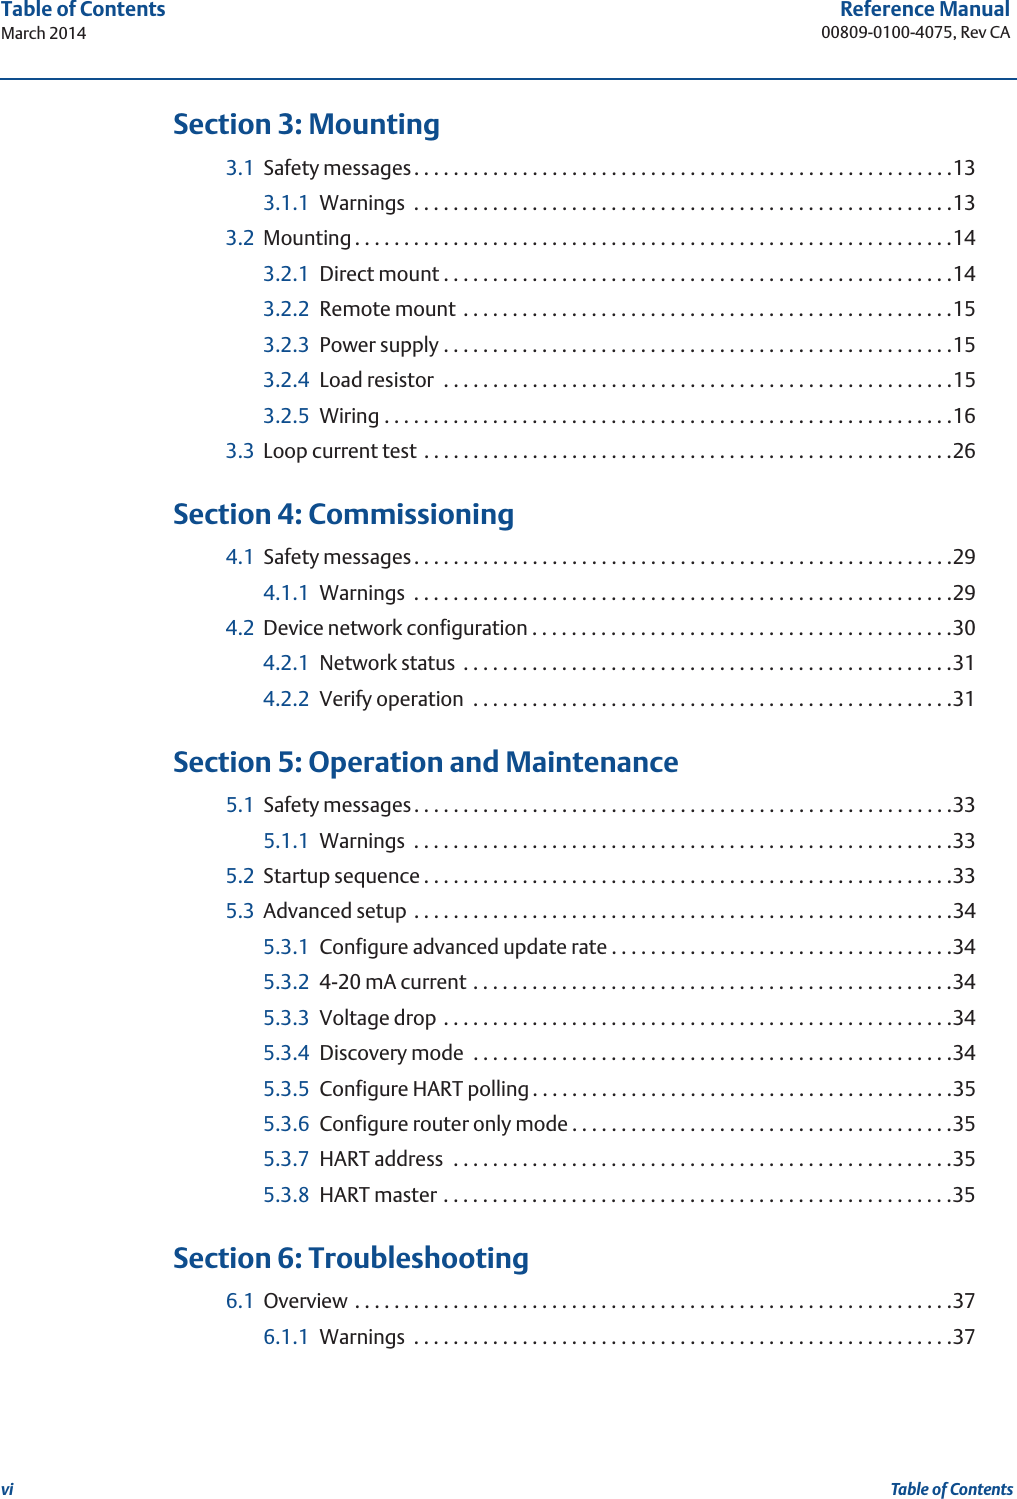 viReference Manual00809-0100-4075, Rev CATable of ContentsMarch 2014Table of Contents 3Section 3: Mounting3.1 Safety messages. . . . . . . . . . . . . . . . . . . . . . . . . . . . . . . . . . . . . . . . . . . . . . . . . . . . . . .133.1.1 Warnings  . . . . . . . . . . . . . . . . . . . . . . . . . . . . . . . . . . . . . . . . . . . . . . . . . . . . . . .133.2 Mounting . . . . . . . . . . . . . . . . . . . . . . . . . . . . . . . . . . . . . . . . . . . . . . . . . . . . . . . . . . . . .143.2.1 Direct mount . . . . . . . . . . . . . . . . . . . . . . . . . . . . . . . . . . . . . . . . . . . . . . . . . . . .143.2.2 Remote mount  . . . . . . . . . . . . . . . . . . . . . . . . . . . . . . . . . . . . . . . . . . . . . . . . . .153.2.3 Power supply . . . . . . . . . . . . . . . . . . . . . . . . . . . . . . . . . . . . . . . . . . . . . . . . . . . .153.2.4 Load resistor  . . . . . . . . . . . . . . . . . . . . . . . . . . . . . . . . . . . . . . . . . . . . . . . . . . . .153.2.5 Wiring . . . . . . . . . . . . . . . . . . . . . . . . . . . . . . . . . . . . . . . . . . . . . . . . . . . . . . . . . .163.3 Loop current test  . . . . . . . . . . . . . . . . . . . . . . . . . . . . . . . . . . . . . . . . . . . . . . . . . . . . . .26 4Section 4: Commissioning4.1 Safety messages. . . . . . . . . . . . . . . . . . . . . . . . . . . . . . . . . . . . . . . . . . . . . . . . . . . . . . .294.1.1 Warnings  . . . . . . . . . . . . . . . . . . . . . . . . . . . . . . . . . . . . . . . . . . . . . . . . . . . . . . .294.2 Device network configuration . . . . . . . . . . . . . . . . . . . . . . . . . . . . . . . . . . . . . . . . . . .304.2.1 Network status  . . . . . . . . . . . . . . . . . . . . . . . . . . . . . . . . . . . . . . . . . . . . . . . . . .314.2.2 Verify operation  . . . . . . . . . . . . . . . . . . . . . . . . . . . . . . . . . . . . . . . . . . . . . . . . .31 5Section 5: Operation and Maintenance5.1 Safety messages. . . . . . . . . . . . . . . . . . . . . . . . . . . . . . . . . . . . . . . . . . . . . . . . . . . . . . .335.1.1 Warnings  . . . . . . . . . . . . . . . . . . . . . . . . . . . . . . . . . . . . . . . . . . . . . . . . . . . . . . .335.2 Startup sequence . . . . . . . . . . . . . . . . . . . . . . . . . . . . . . . . . . . . . . . . . . . . . . . . . . . . . .335.3 Advanced setup . . . . . . . . . . . . . . . . . . . . . . . . . . . . . . . . . . . . . . . . . . . . . . . . . . . . . . .345.3.1 Configure advanced update rate . . . . . . . . . . . . . . . . . . . . . . . . . . . . . . . . . . .345.3.2 4-20 mA current . . . . . . . . . . . . . . . . . . . . . . . . . . . . . . . . . . . . . . . . . . . . . . . . .345.3.3 Voltage drop . . . . . . . . . . . . . . . . . . . . . . . . . . . . . . . . . . . . . . . . . . . . . . . . . . . .345.3.4 Discovery mode  . . . . . . . . . . . . . . . . . . . . . . . . . . . . . . . . . . . . . . . . . . . . . . . . .345.3.5 Configure HART polling . . . . . . . . . . . . . . . . . . . . . . . . . . . . . . . . . . . . . . . . . . .355.3.6 Configure router only mode . . . . . . . . . . . . . . . . . . . . . . . . . . . . . . . . . . . . . . .355.3.7 HART address  . . . . . . . . . . . . . . . . . . . . . . . . . . . . . . . . . . . . . . . . . . . . . . . . . . .355.3.8 HART master . . . . . . . . . . . . . . . . . . . . . . . . . . . . . . . . . . . . . . . . . . . . . . . . . . . .35 6Section 6: Troubleshooting6.1 Overview . . . . . . . . . . . . . . . . . . . . . . . . . . . . . . . . . . . . . . . . . . . . . . . . . . . . . . . . . . . . .376.1.1 Warnings  . . . . . . . . . . . . . . . . . . . . . . . . . . . . . . . . . . . . . . . . . . . . . . . . . . . . . . .37